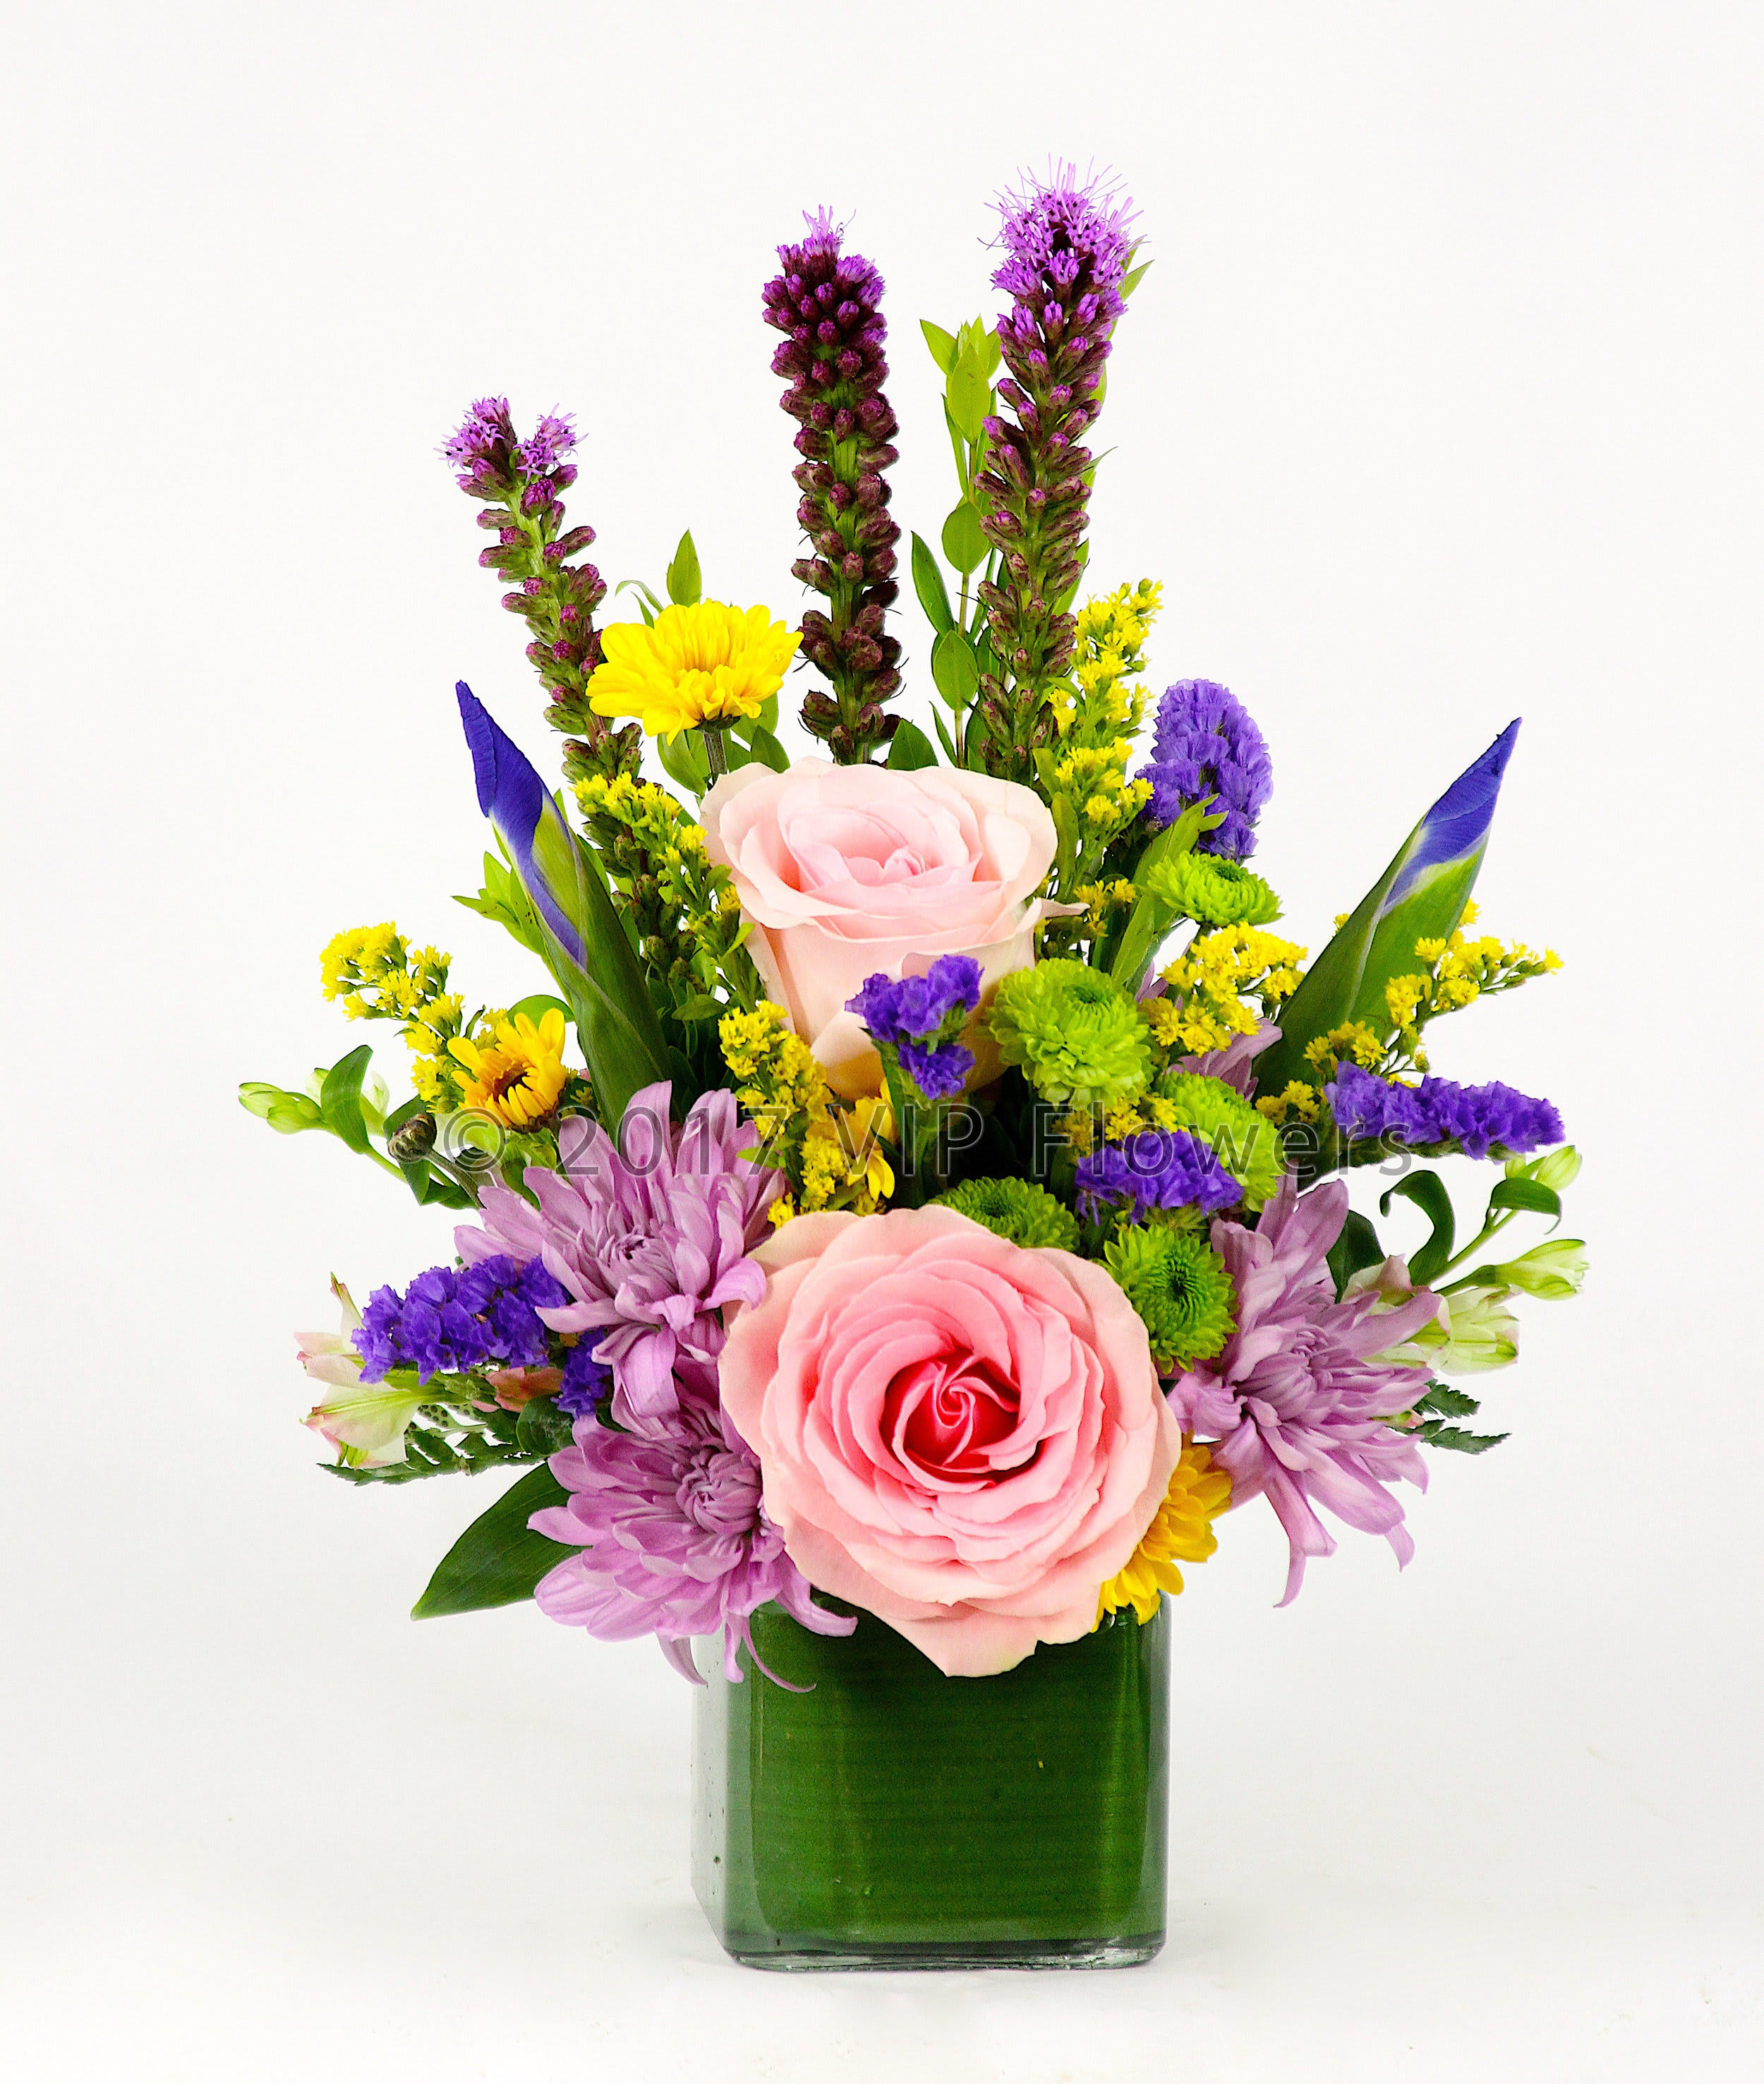 Eventful Surprise - Flowers Included:  Pink Roses Purple Mums Greens Mums Iris Yellow Mums Statice Liatris Seasonal Greens       Substitutions may be necessary to ensure your arrangement or specialty gift is delivered in a timely manner. The utmost care and attention is given to your order to ensure that it is as similar as possible to the requested item (Please note that some flowers and colors may vary due to seasonality.)